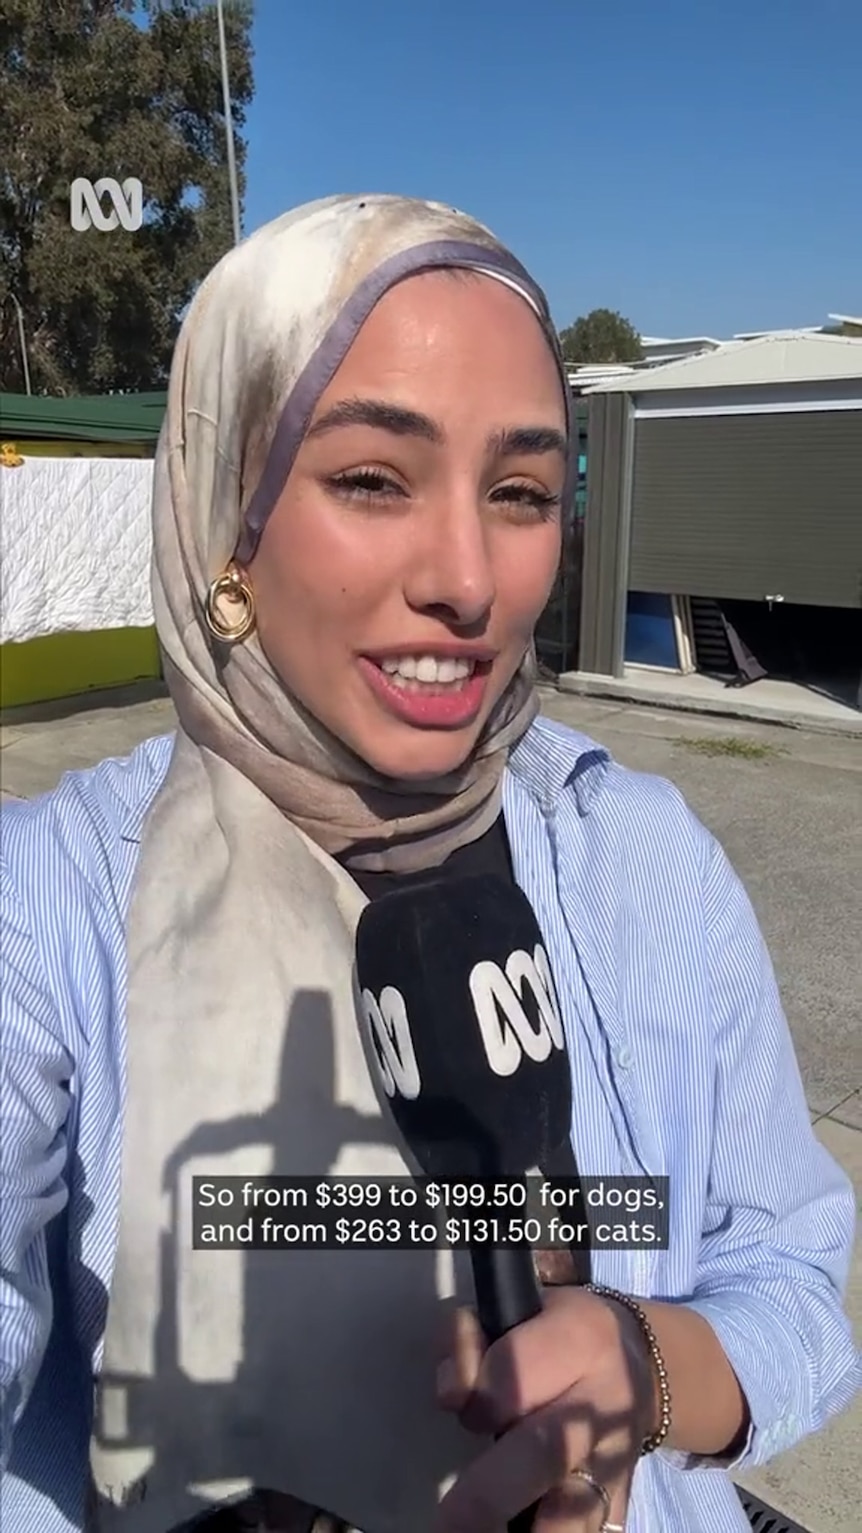 A young woman wearing a hijab holds an ABC-branded microphone.